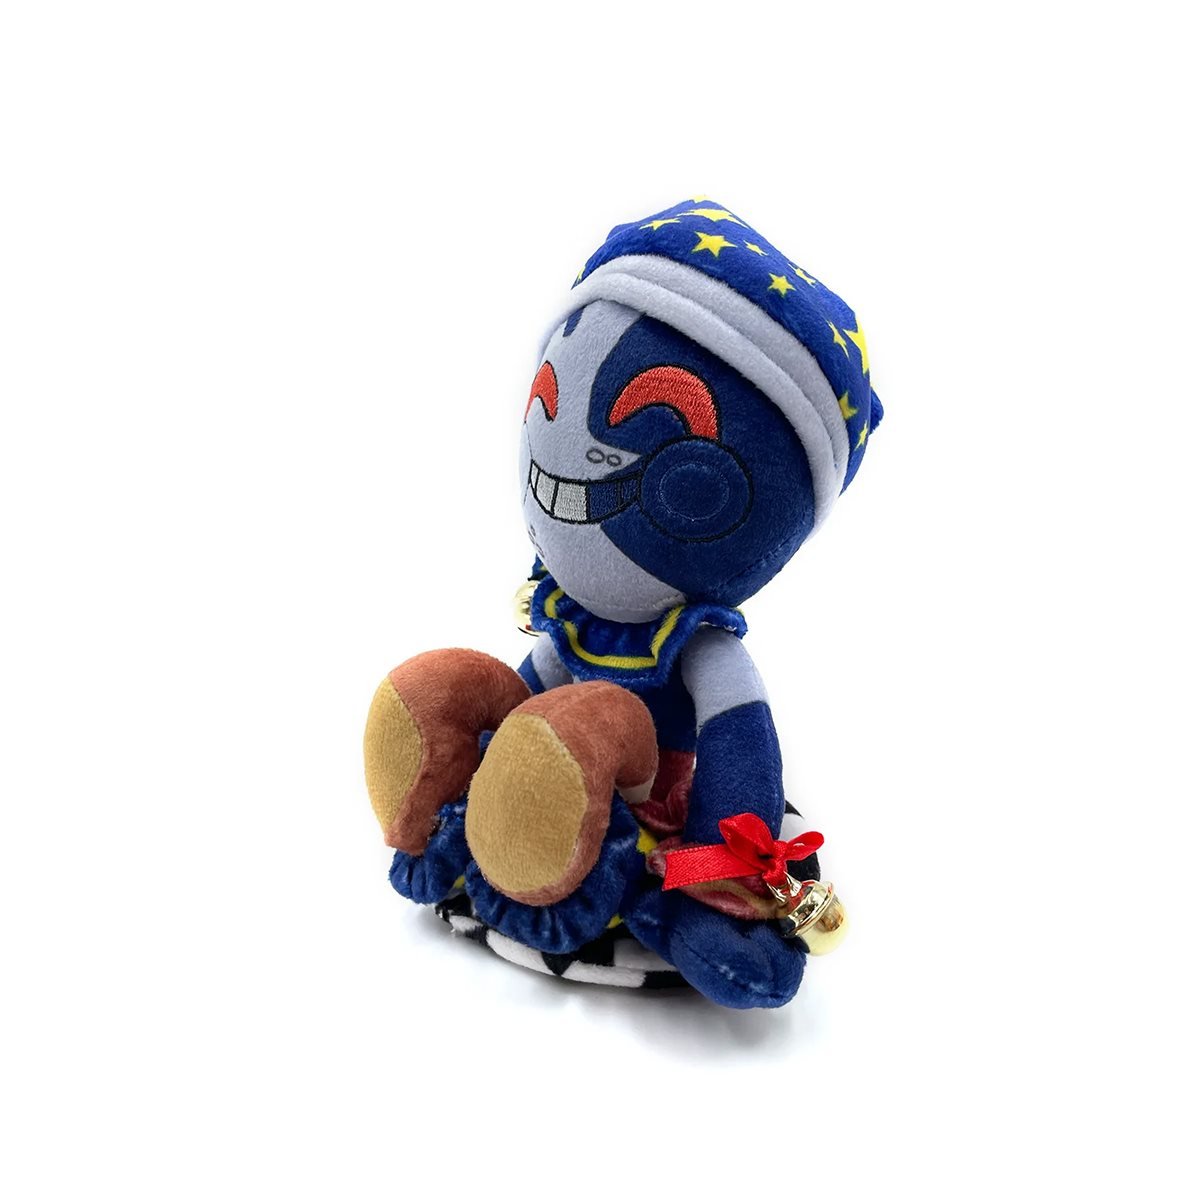 Five Nights at Freddy's: Security Breach Moon 7-Inch Plush